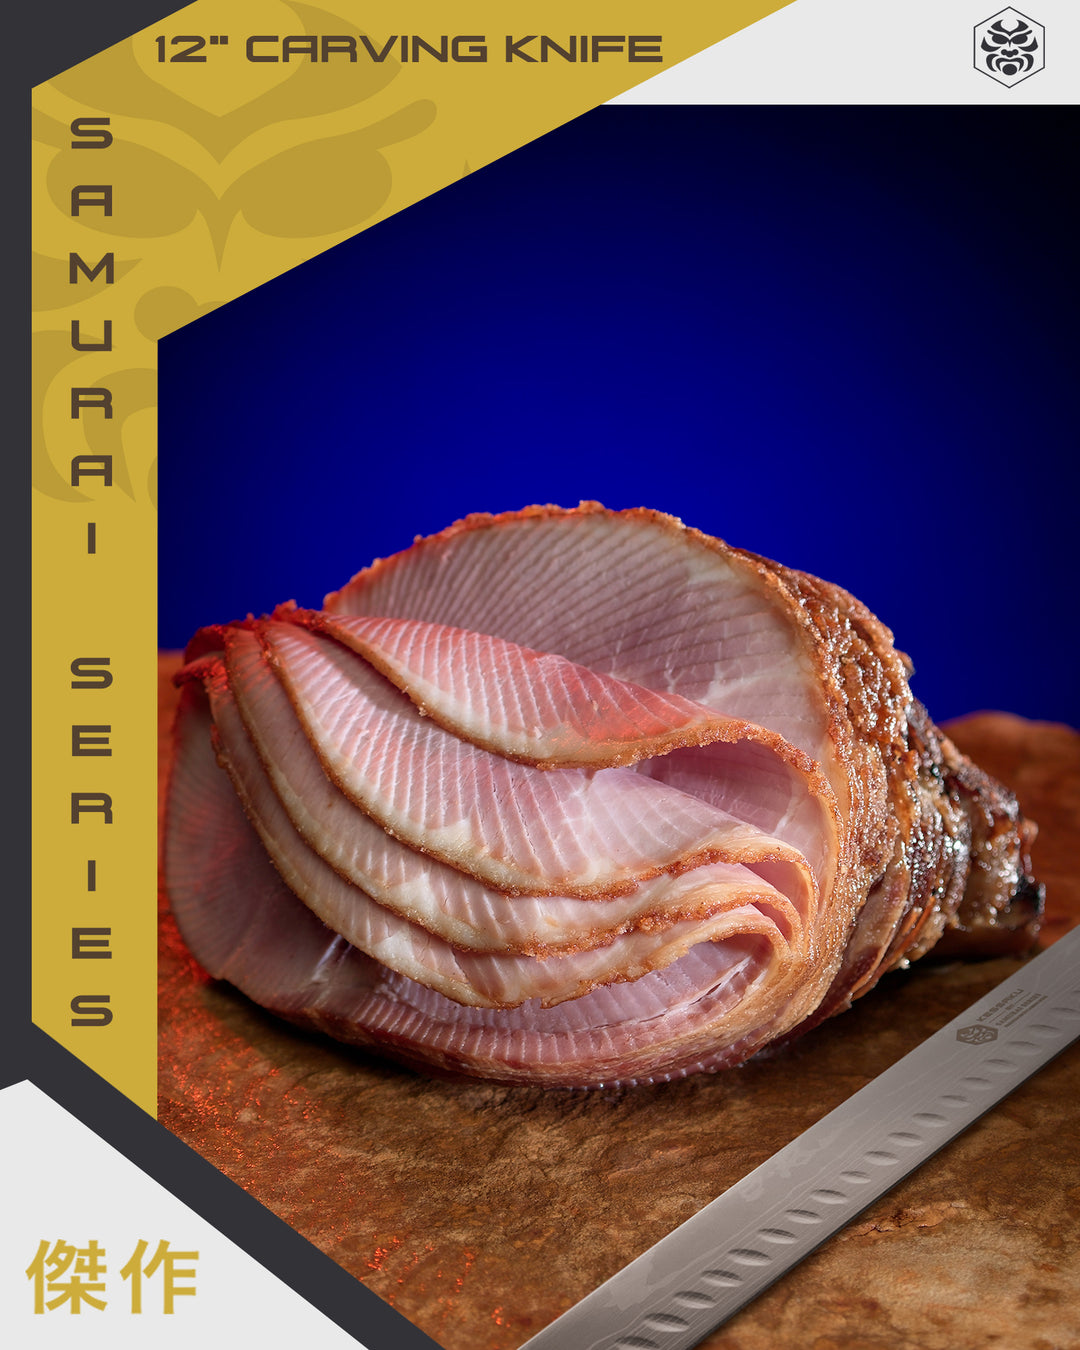 A spiral sliced ham and the Samurai Carving Knife